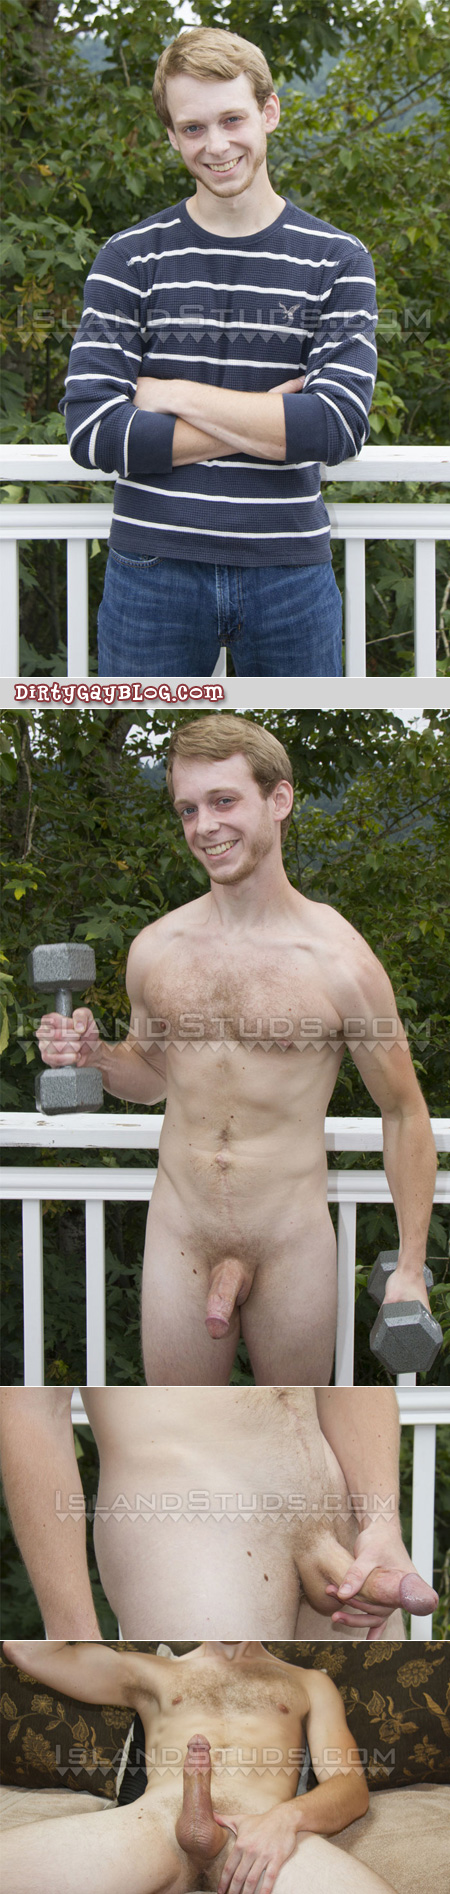 Ginger male nude outdoors